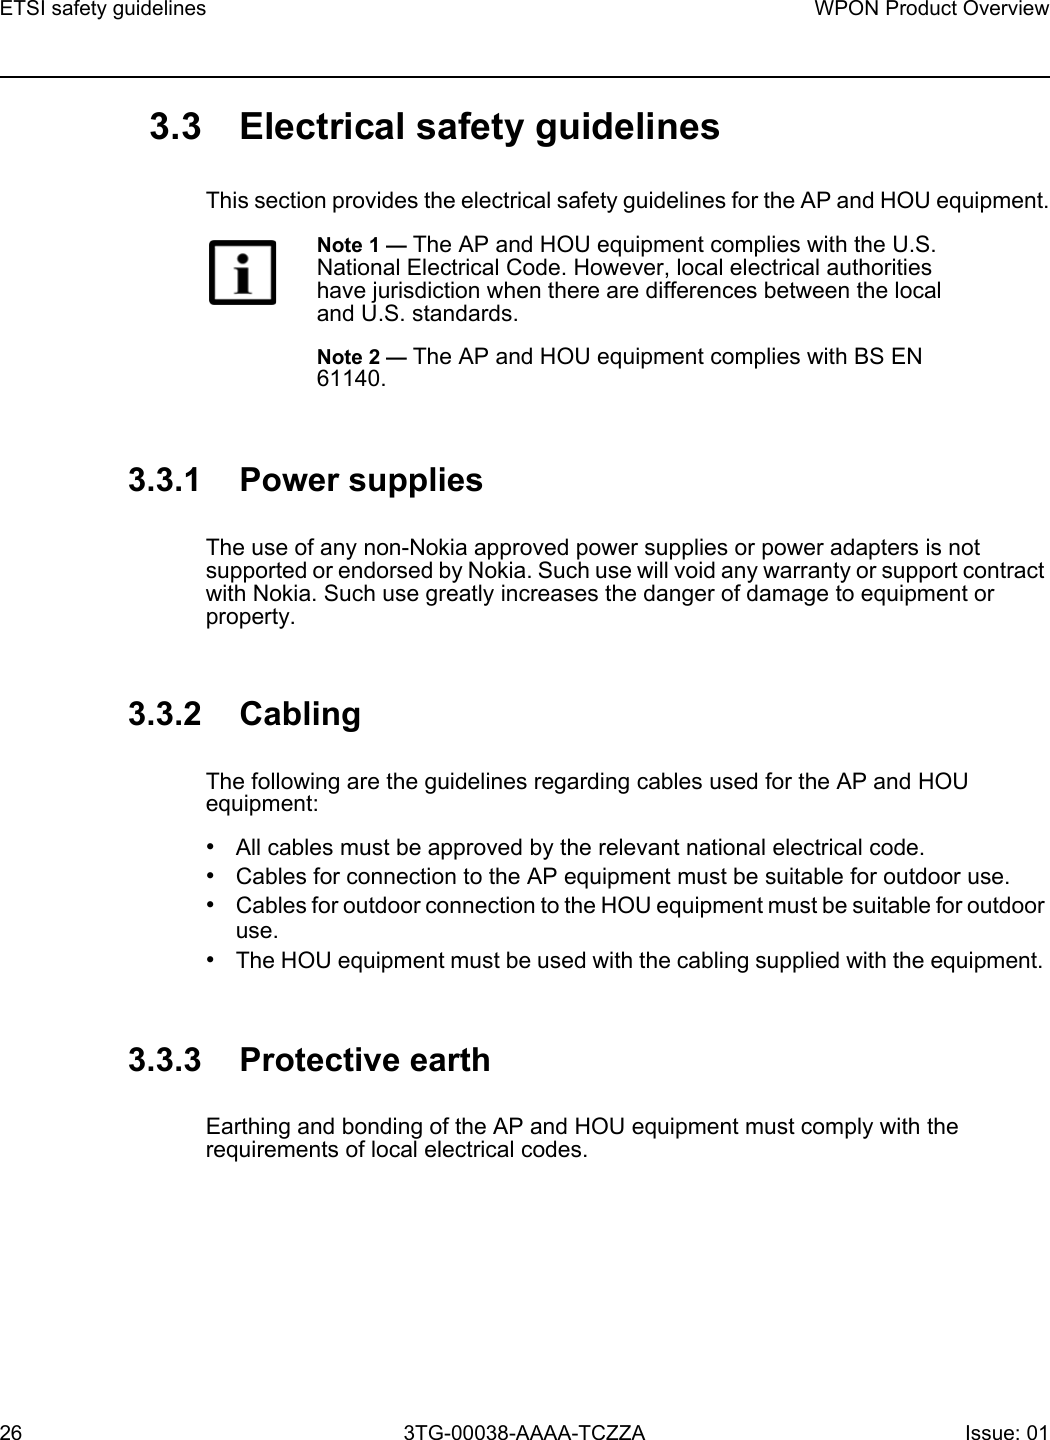 ETSI safety guidelines26WPON Product Overview3TG-00038-AAAA-TCZZA Issue: 01 3.3 Electrical safety guidelinesThis section provides the electrical safety guidelines for the AP and HOU equipment.3.3.1 Power suppliesThe use of any non-Nokia approved power supplies or power adapters is not supported or endorsed by Nokia. Such use will void any warranty or support contract with Nokia. Such use greatly increases the danger of damage to equipment or property.3.3.2 CablingThe following are the guidelines regarding cables used for the AP and HOU equipment:•All cables must be approved by the relevant national electrical code.•Cables for connection to the AP equipment must be suitable for outdoor use.•Cables for outdoor connection to the HOU equipment must be suitable for outdoor use.•The HOU equipment must be used with the cabling supplied with the equipment. 3.3.3 Protective earthEarthing and bonding of the AP and HOU equipment must comply with the requirements of local electrical codes.Note 1 — The AP and HOU equipment complies with the U.S. National Electrical Code. However, local electrical authorities have jurisdiction when there are differences between the local and U.S. standards.Note 2 — The AP and HOU equipment complies with BS EN 61140.